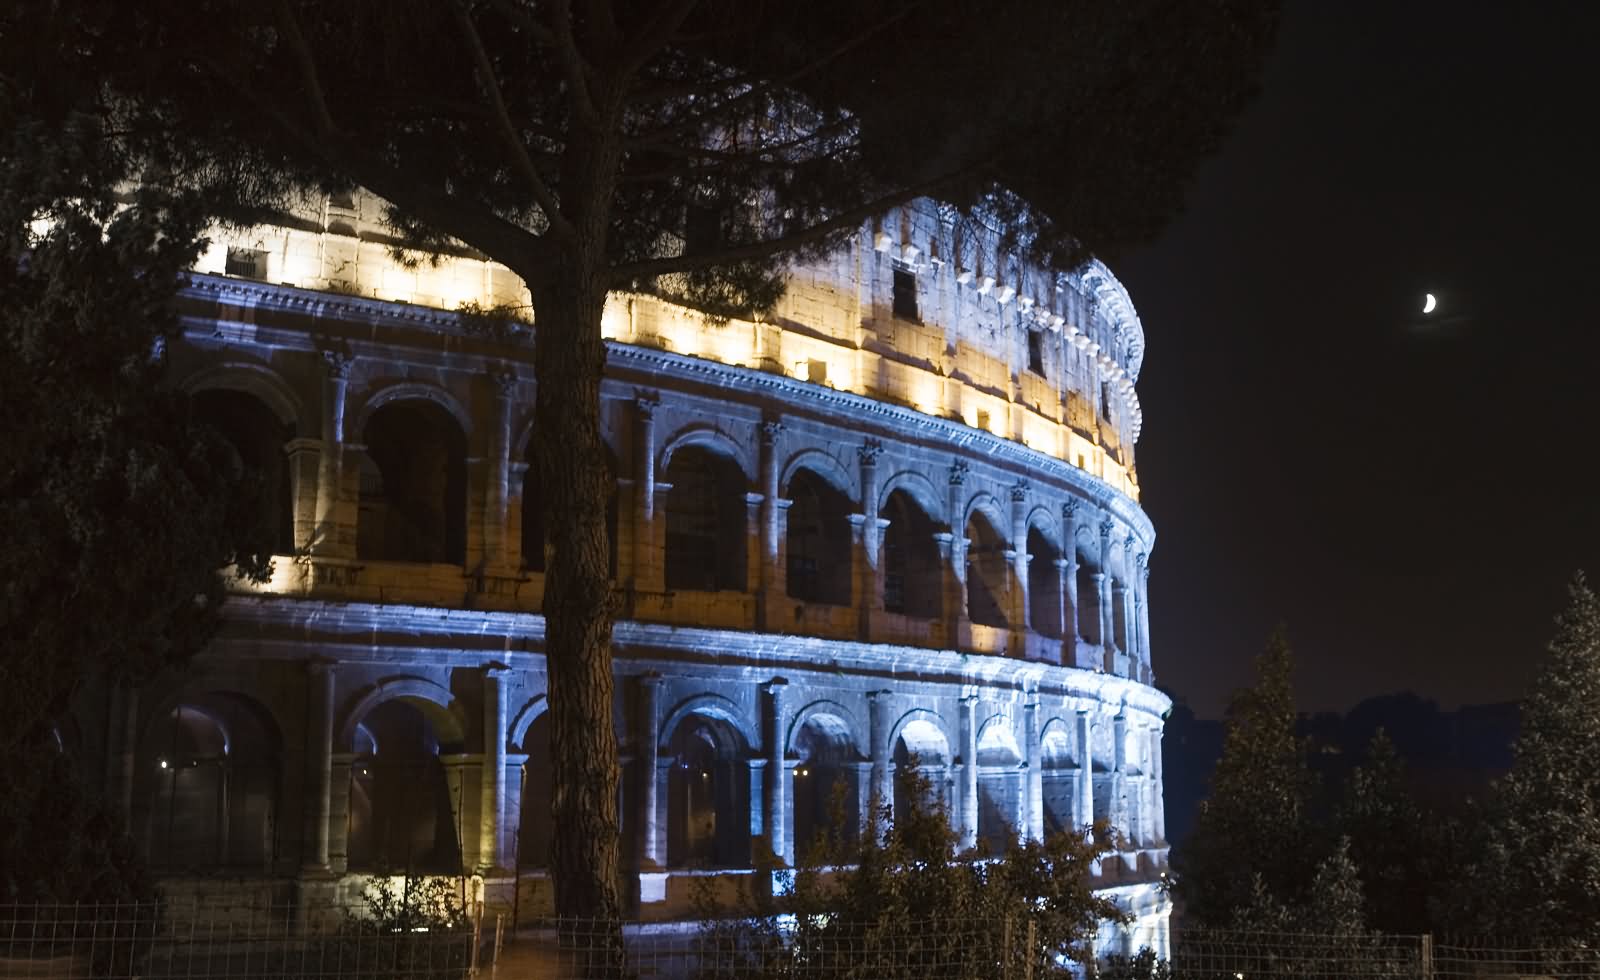 Side View Image Of The Colosseum At Night